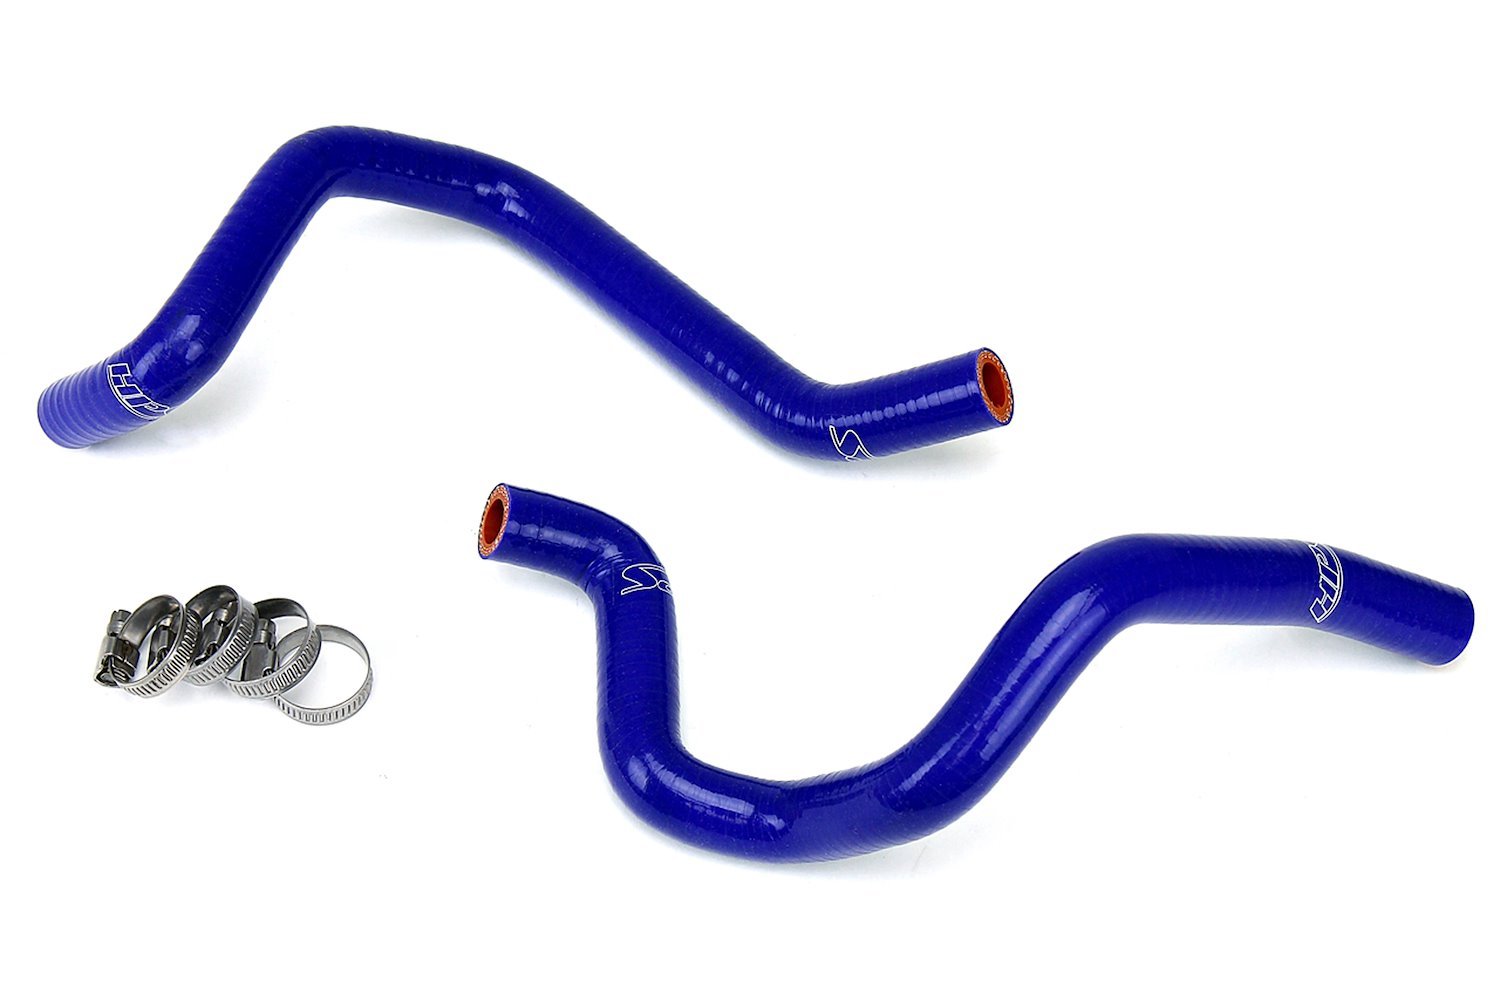 57-1804-BLUE Heater Hose Kit, 3-Ply Reinforced Silicone, Replace OEM Rubber Heater Coolant Hoses